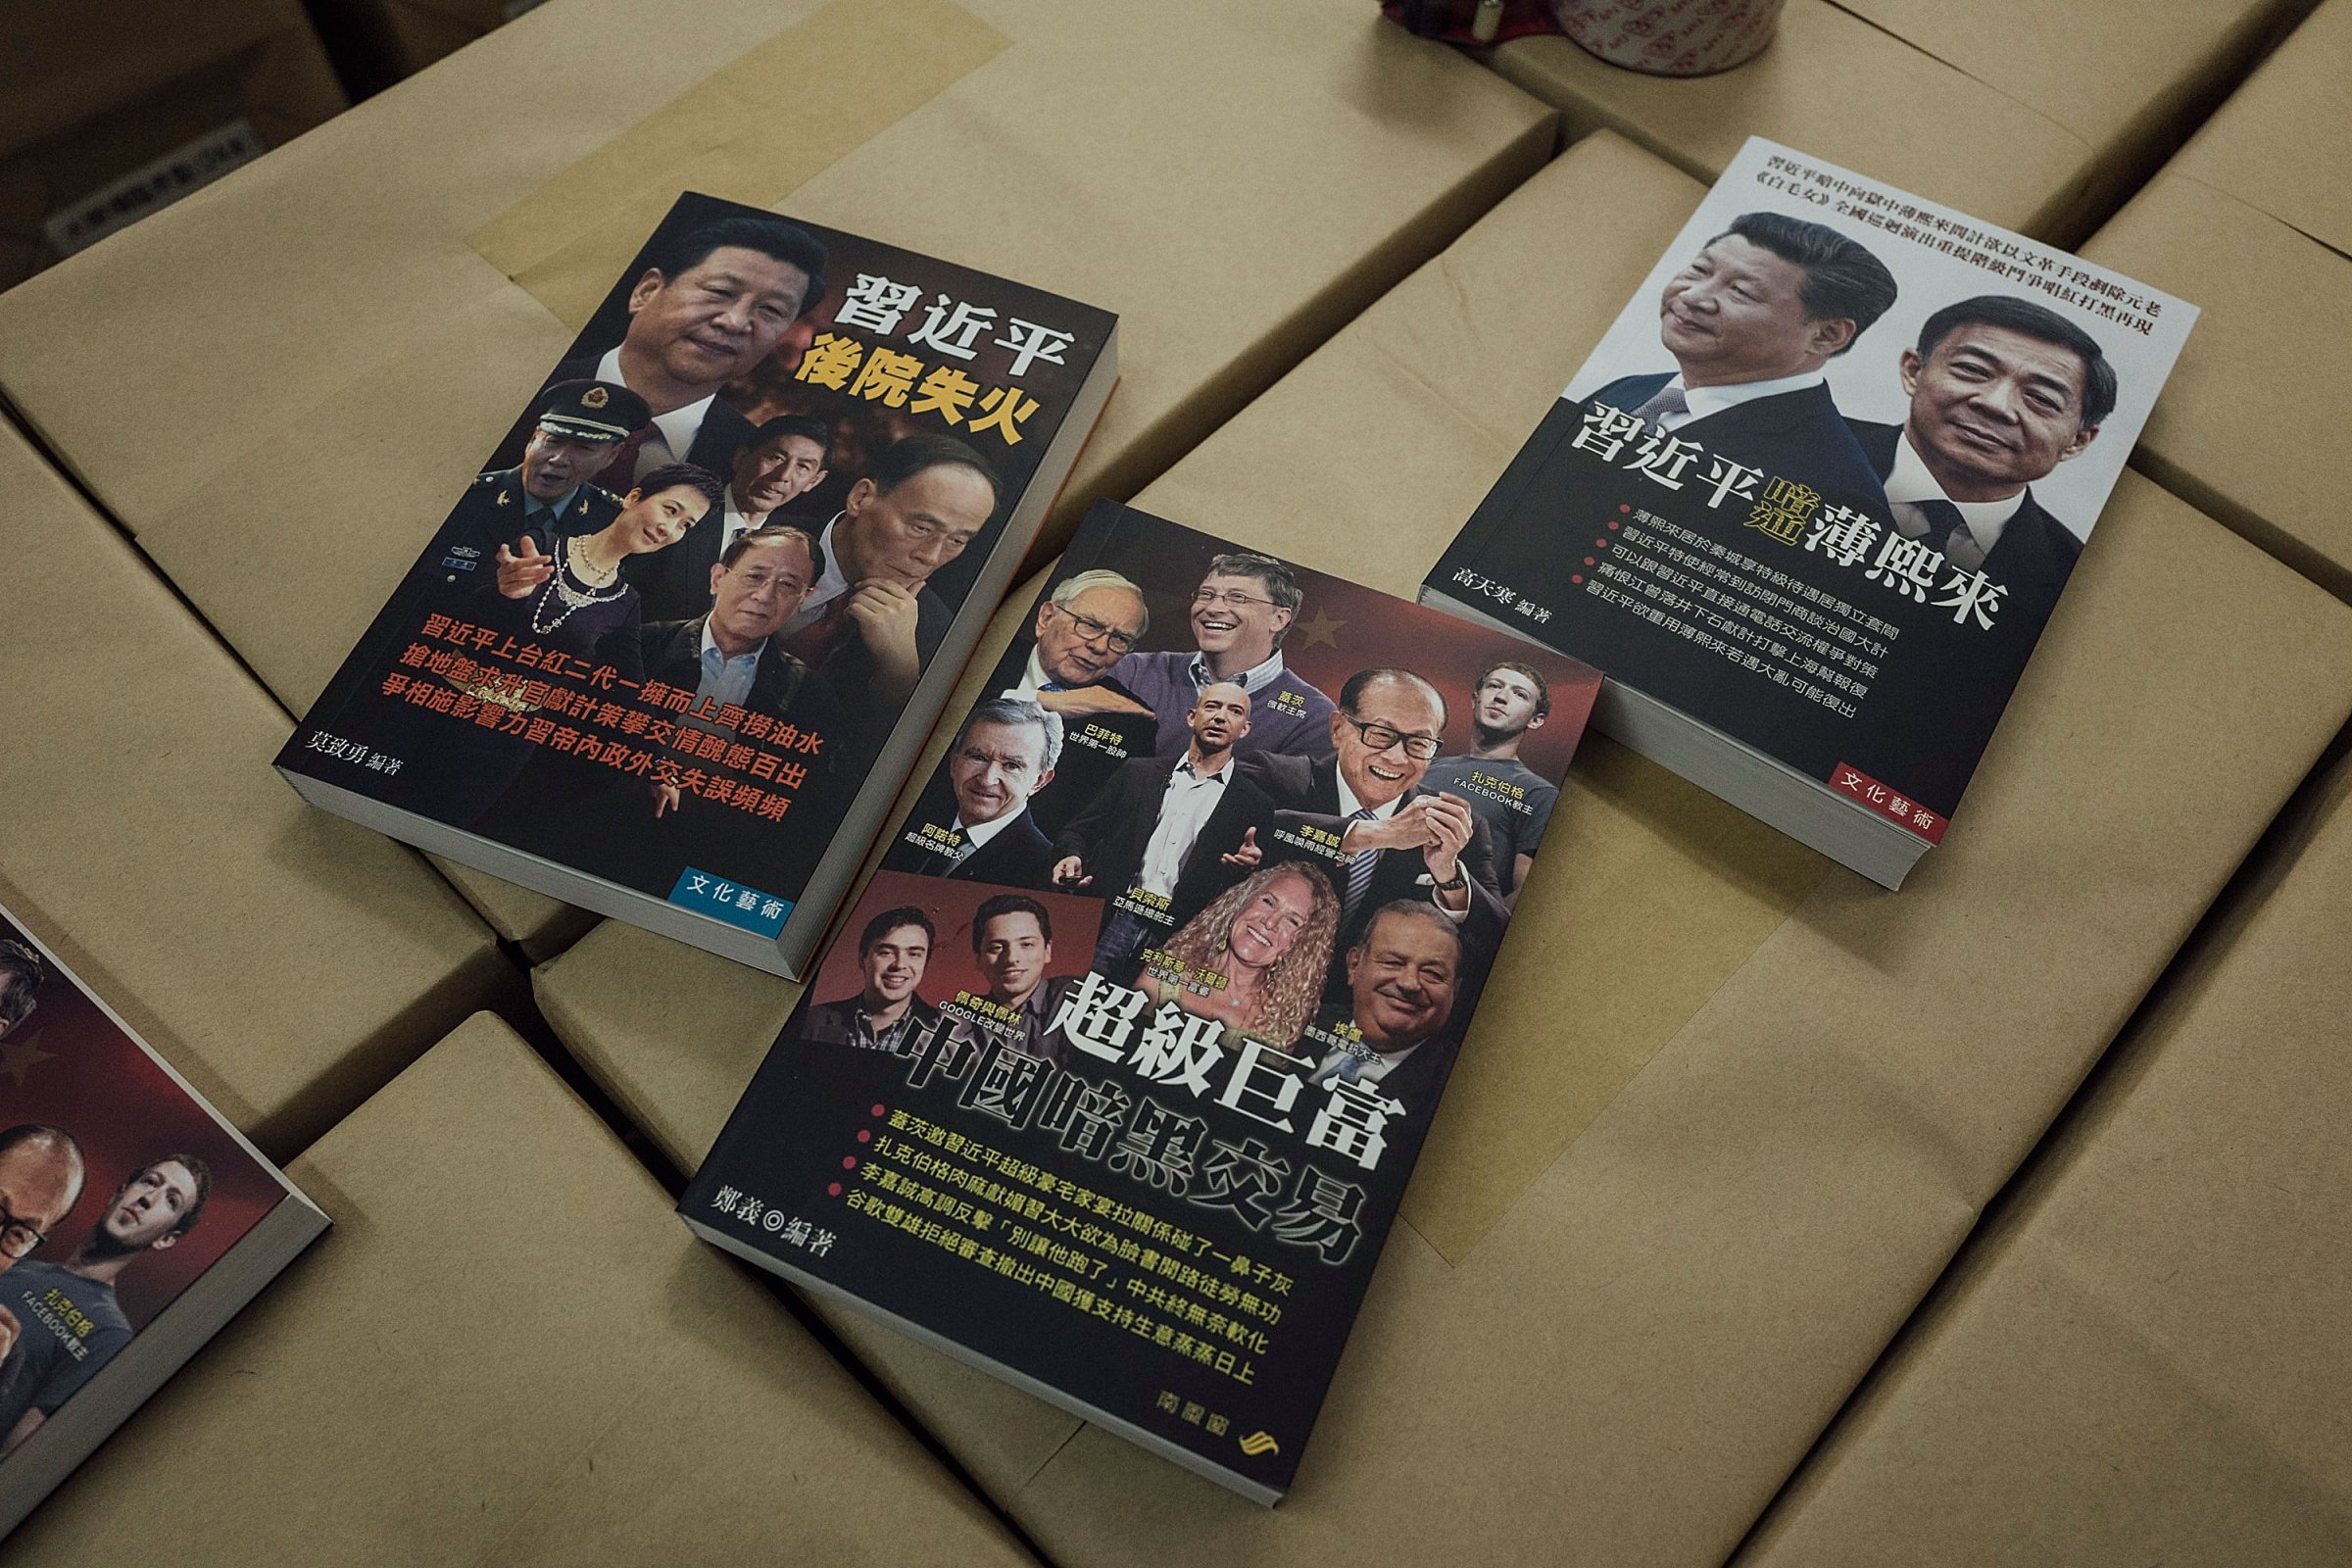 &lt;&gt; on January 8, 2016 in Hong Kong, Hong Kong. The disappearance of five Hong Kong booksellers, including UK passport holder Lee Bo, has sent shivers through Hong Kong as anxiety grows that Chinese control over the city is tightening. Bookshops are removing political works from their shelves, while publishers and store owners selling titles banned in mainland China say they now feel under threat.